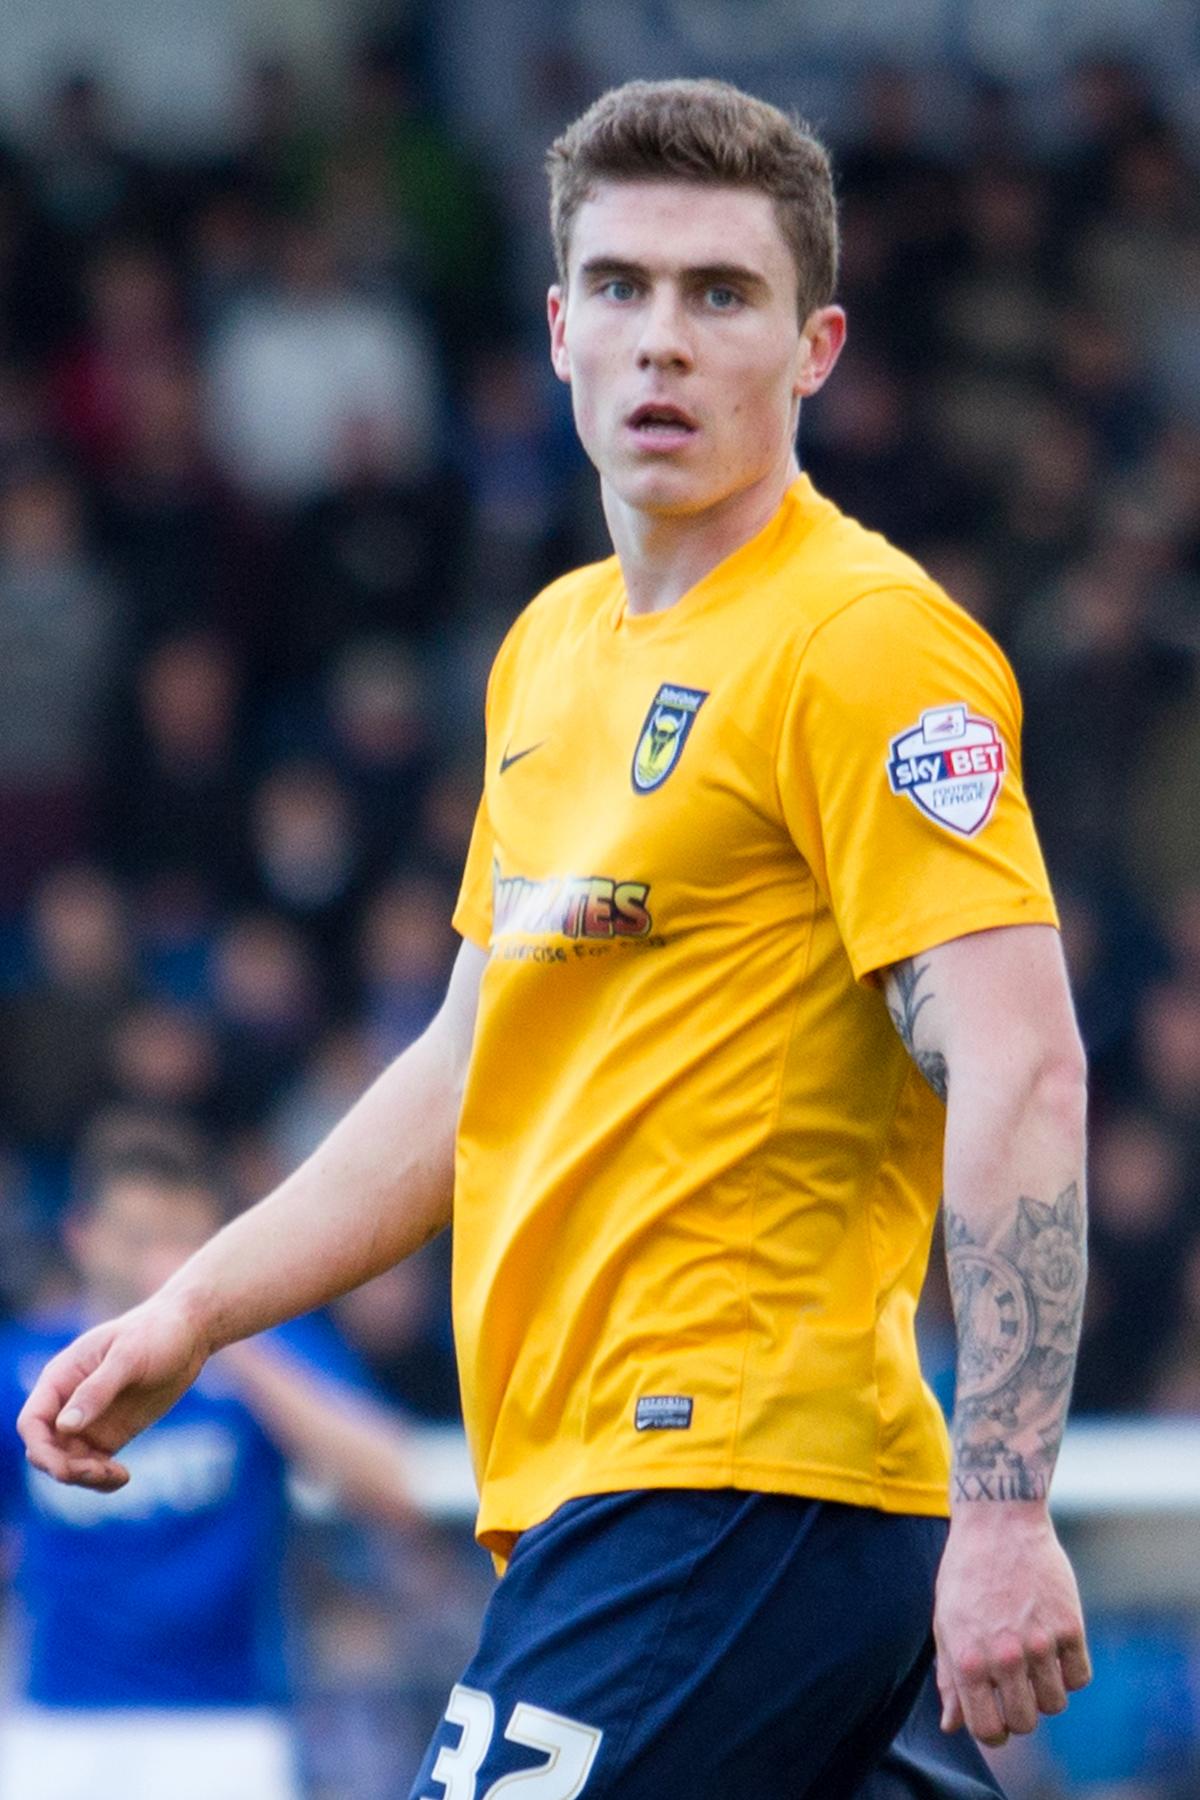 Pictures from the U's 3-0 lose at Chesterfield